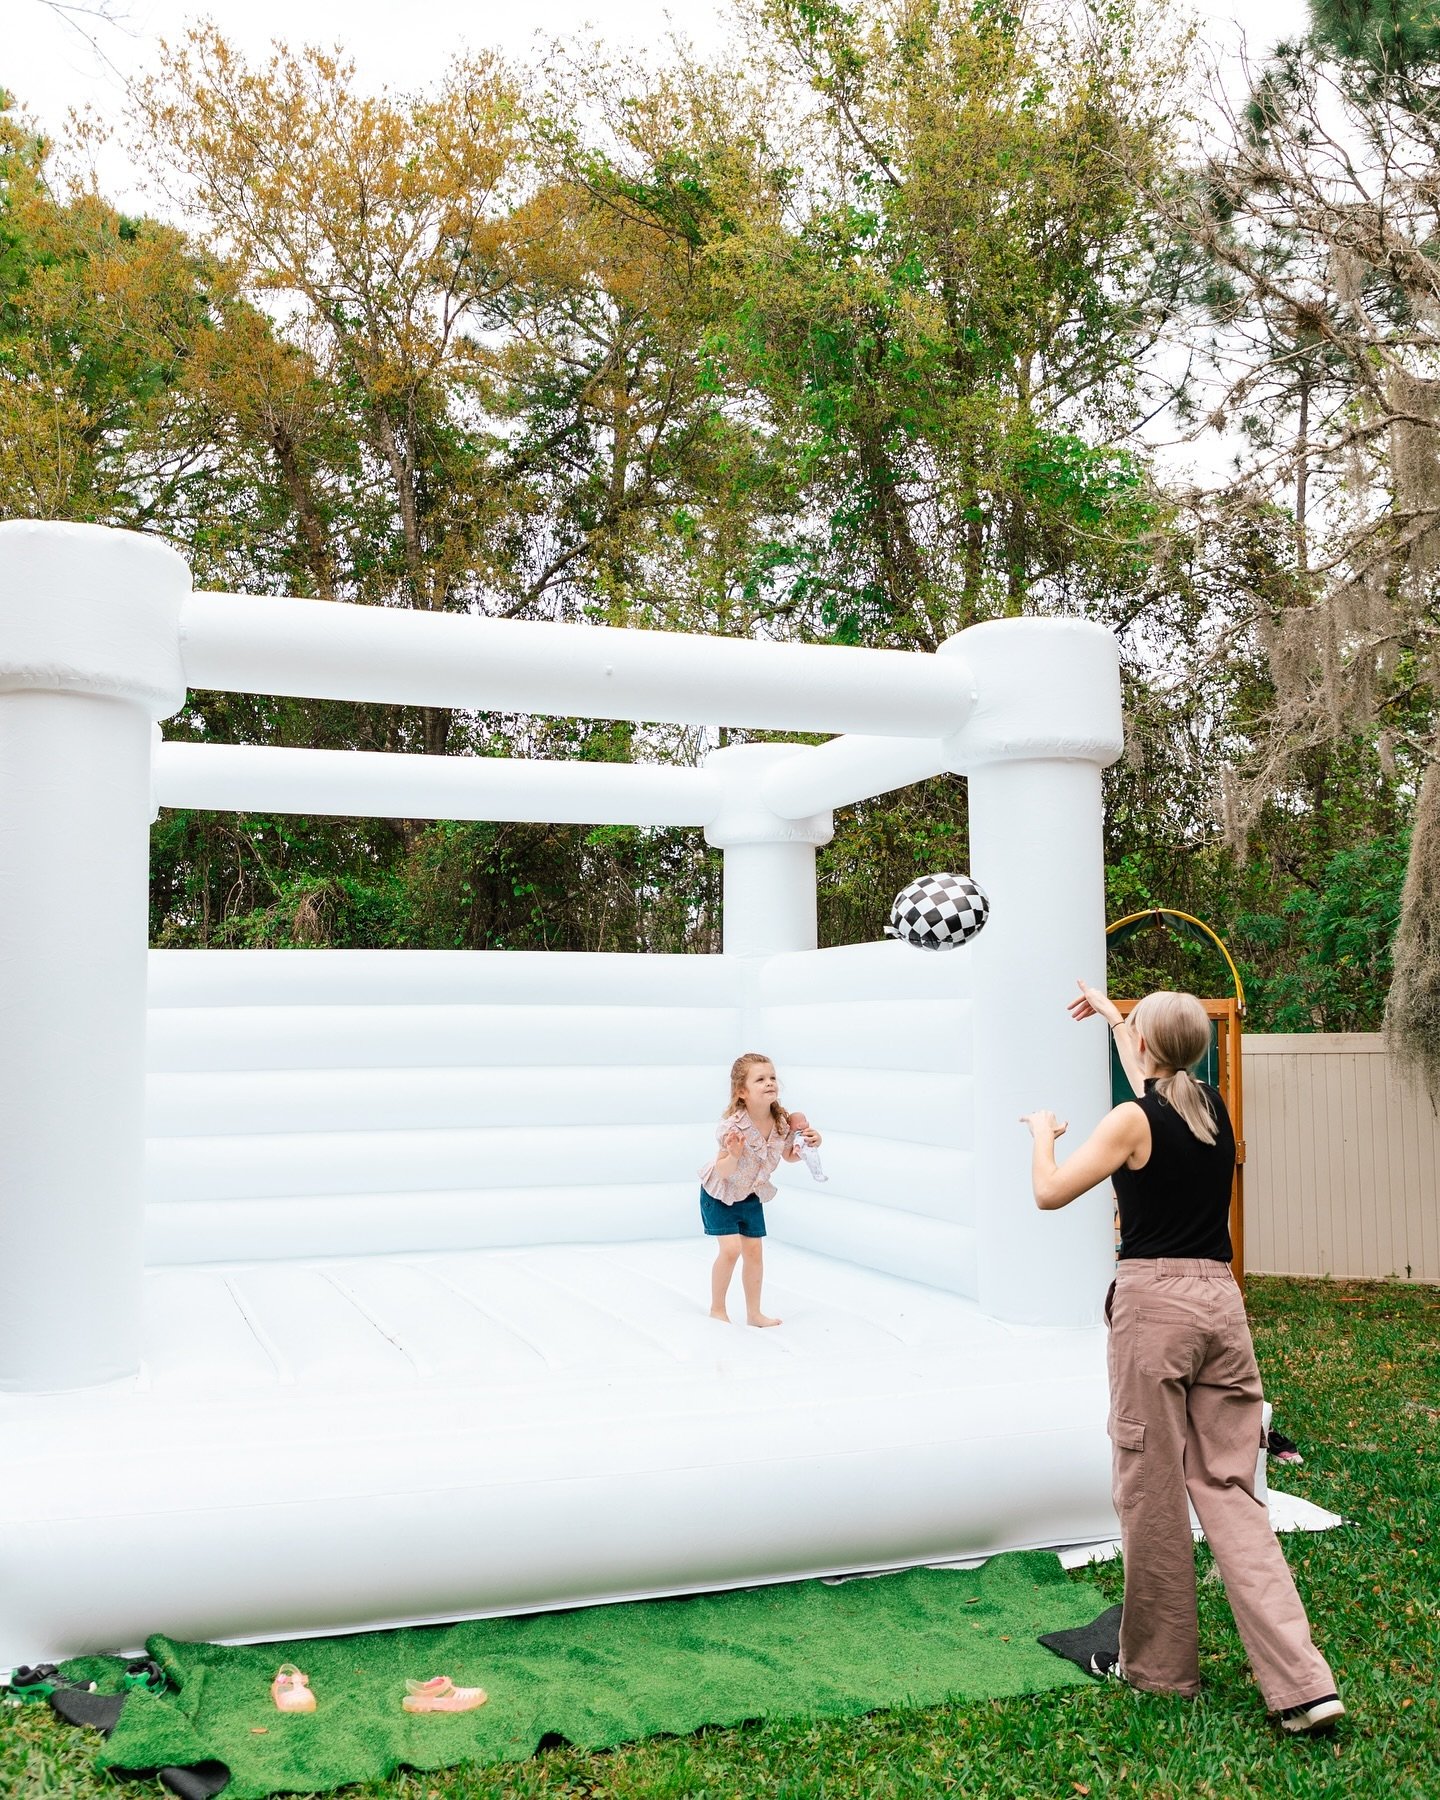 We are so ready for fun summer days &amp; all of the birthday parties that come with it! #bouncehouserentals #orladnobouncehouse #bouncehouse